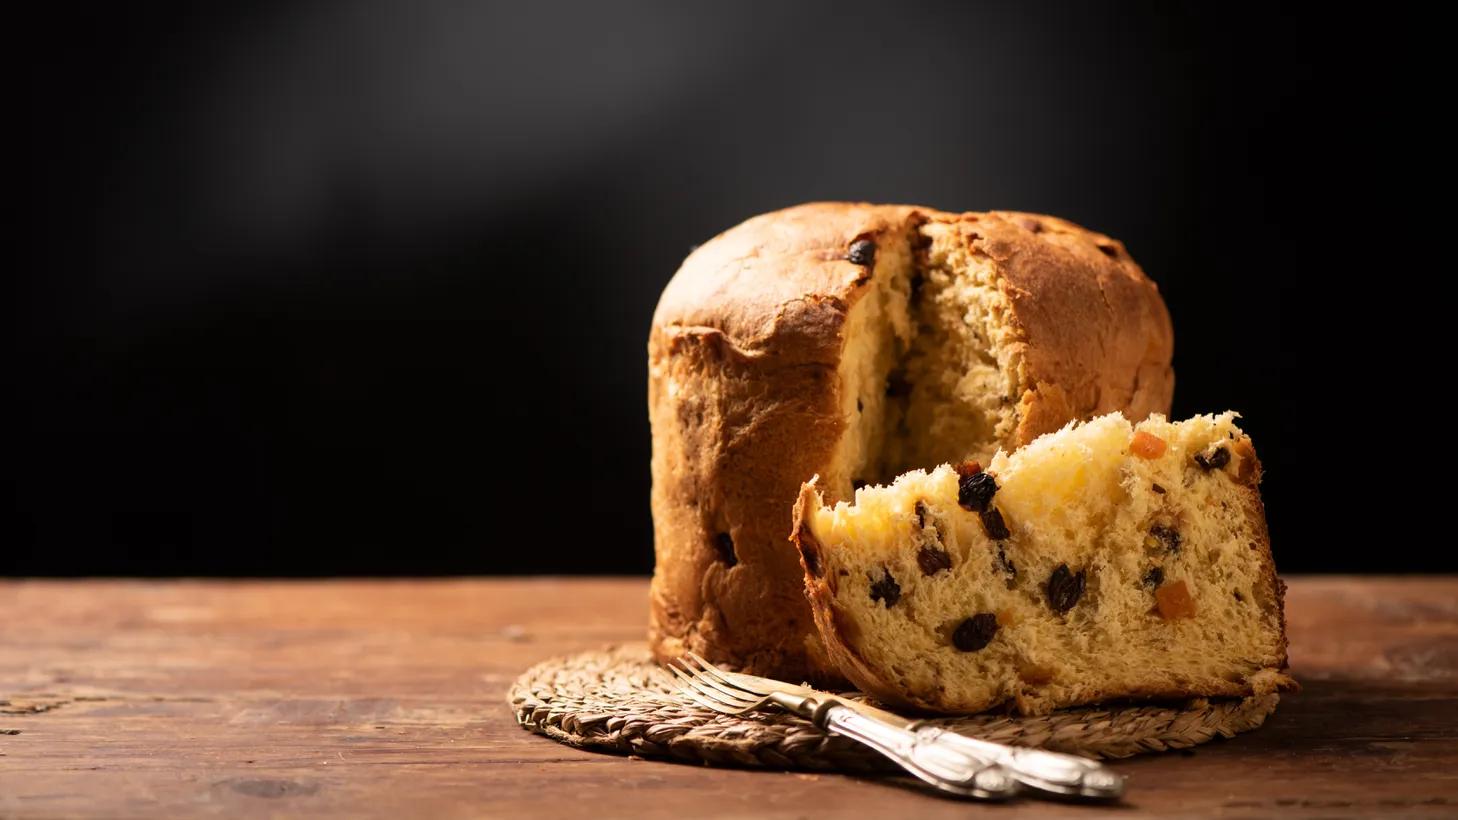 Fiori di Sicilia is used in everything from panettone to colomba in Italian baking.